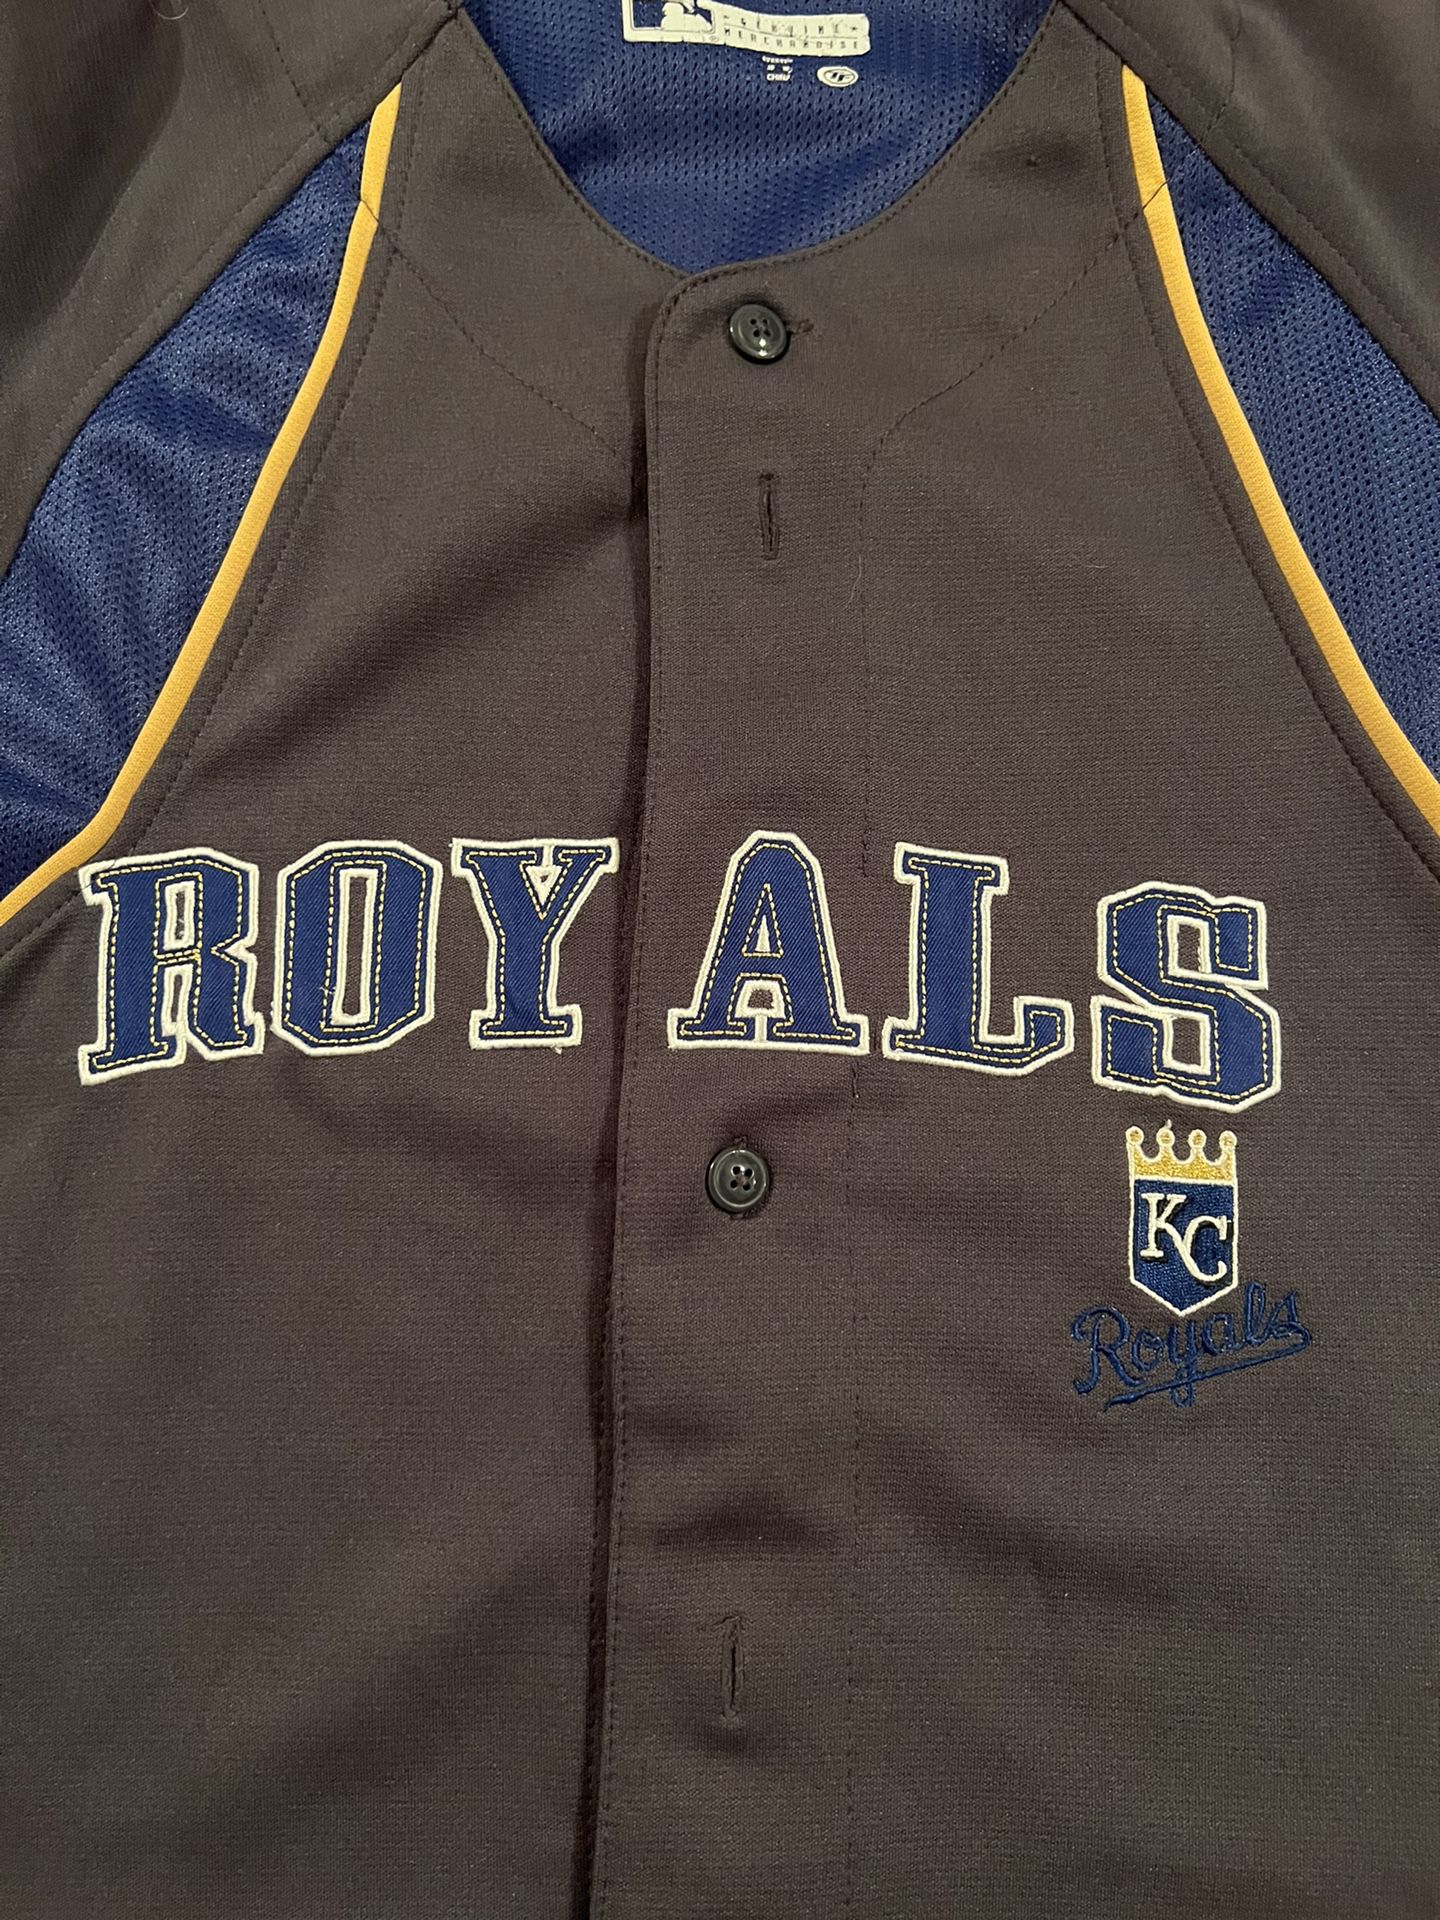 Kansas City Royals Jersey for Sale in San Diego, CA - OfferUp